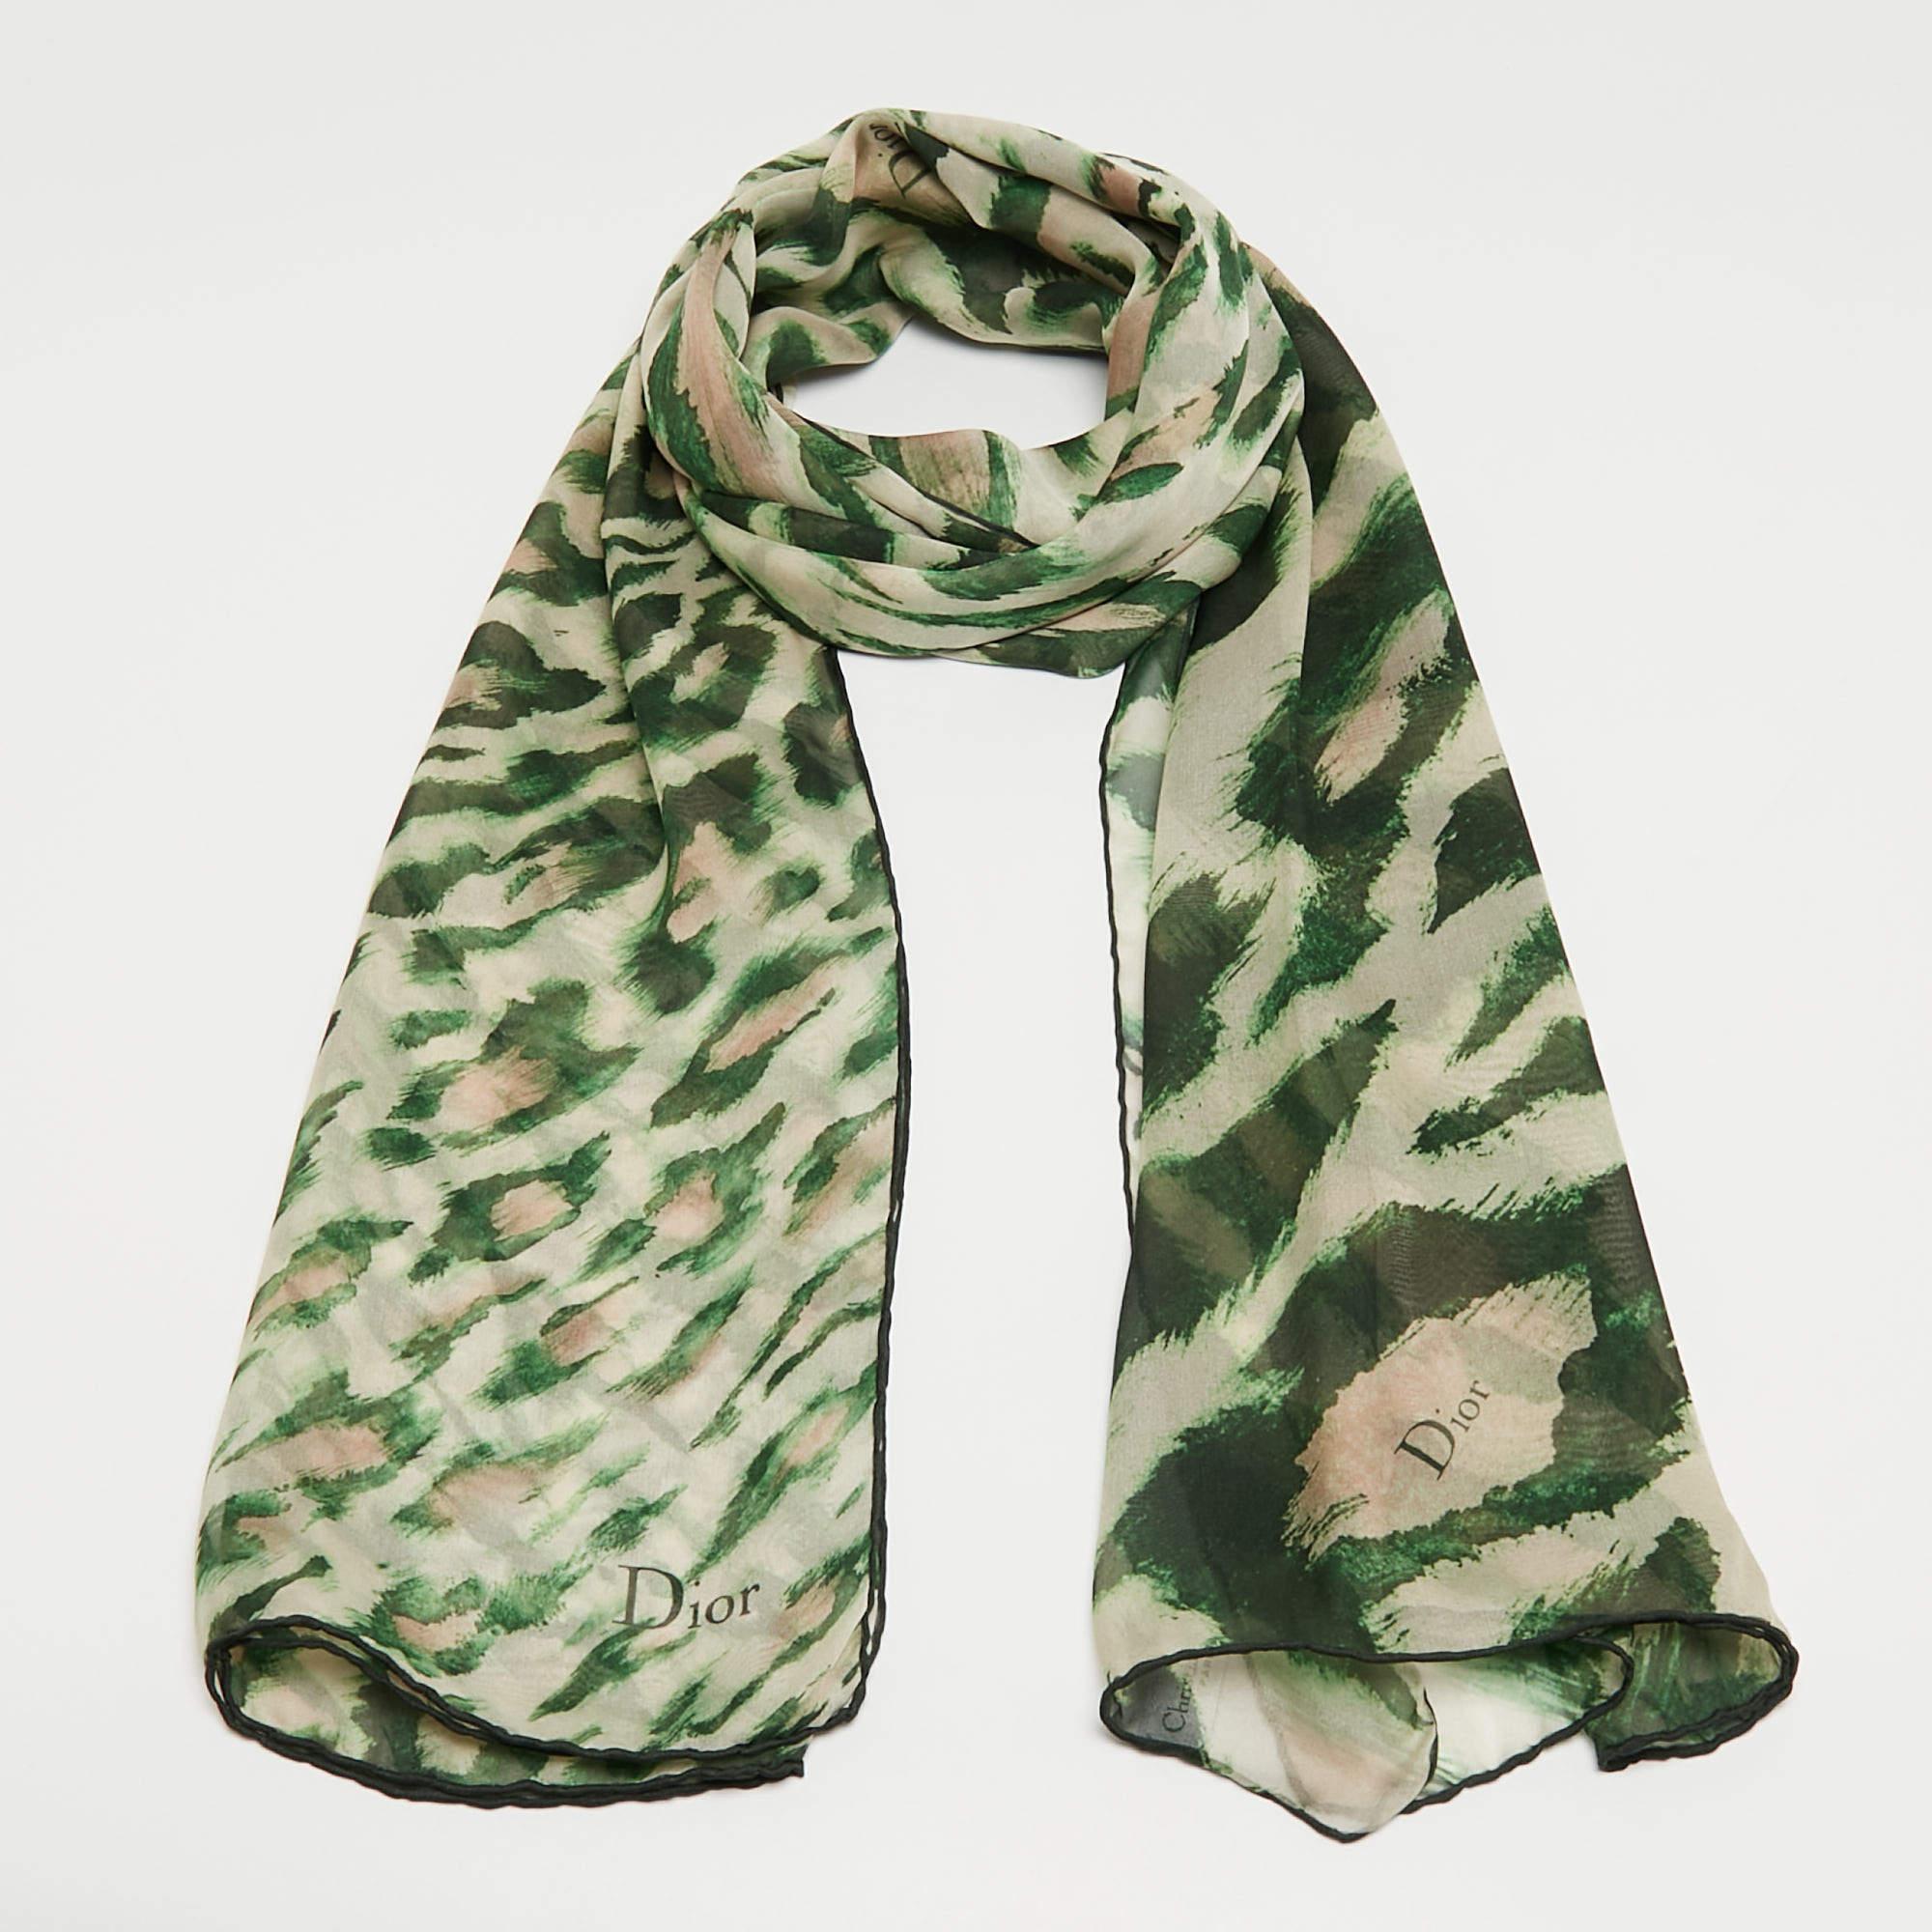 This lovely scarf is a fun way to accessorize your casual outfits and statement totes. This scarf from Dior features an interesting design. It is cut from smooth fabric and will elevate all your looks.

